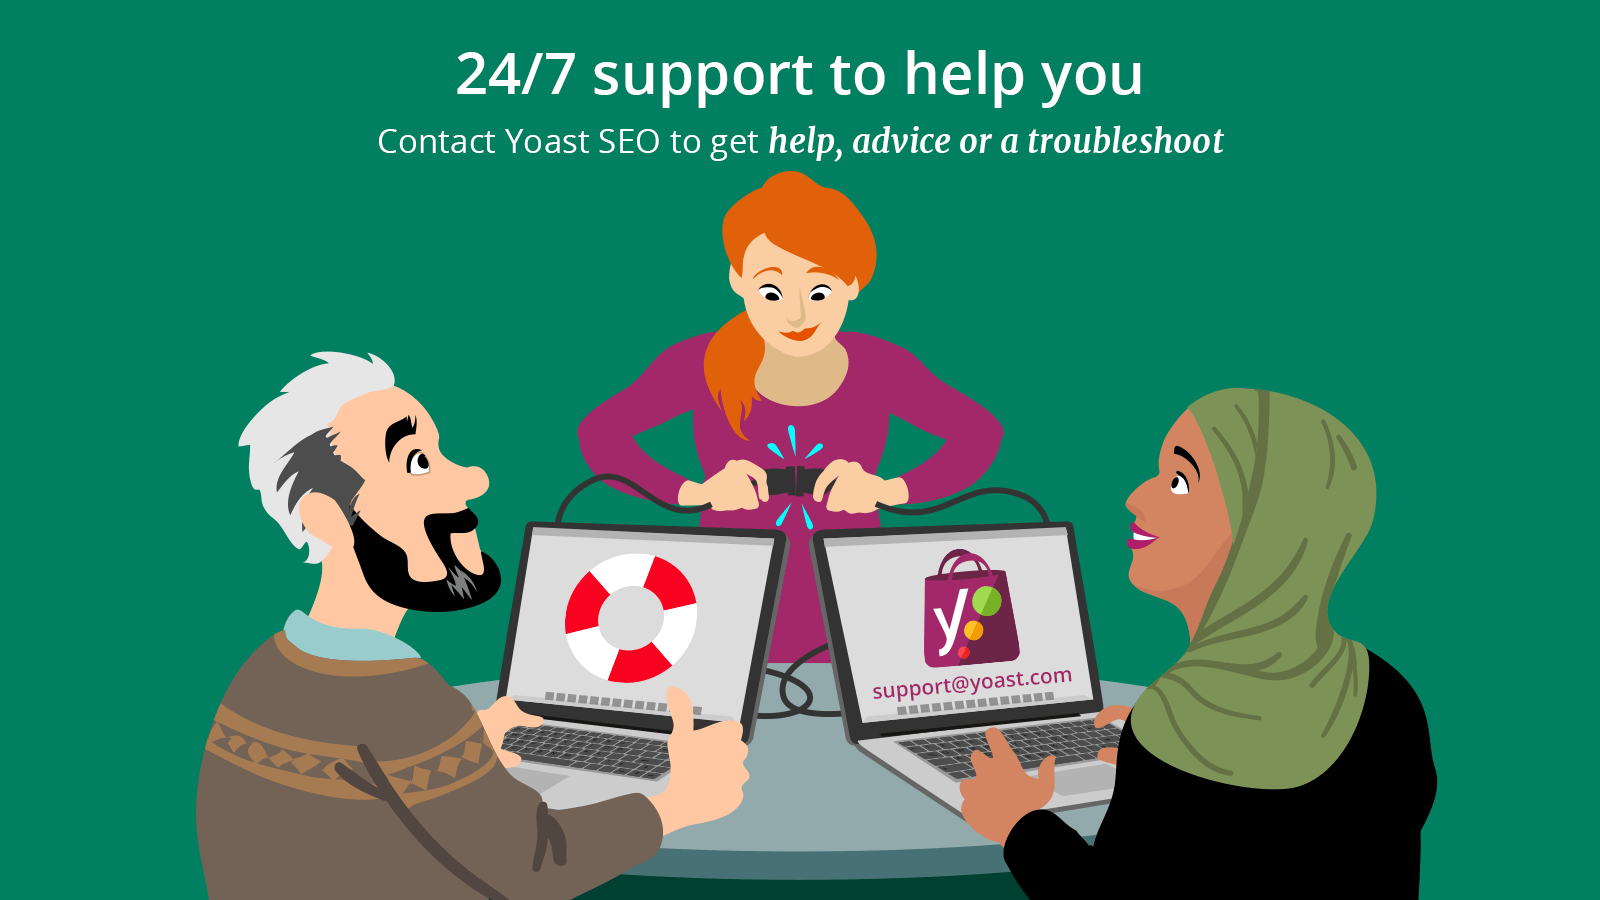 Get 24/7 support with Yoast SEO